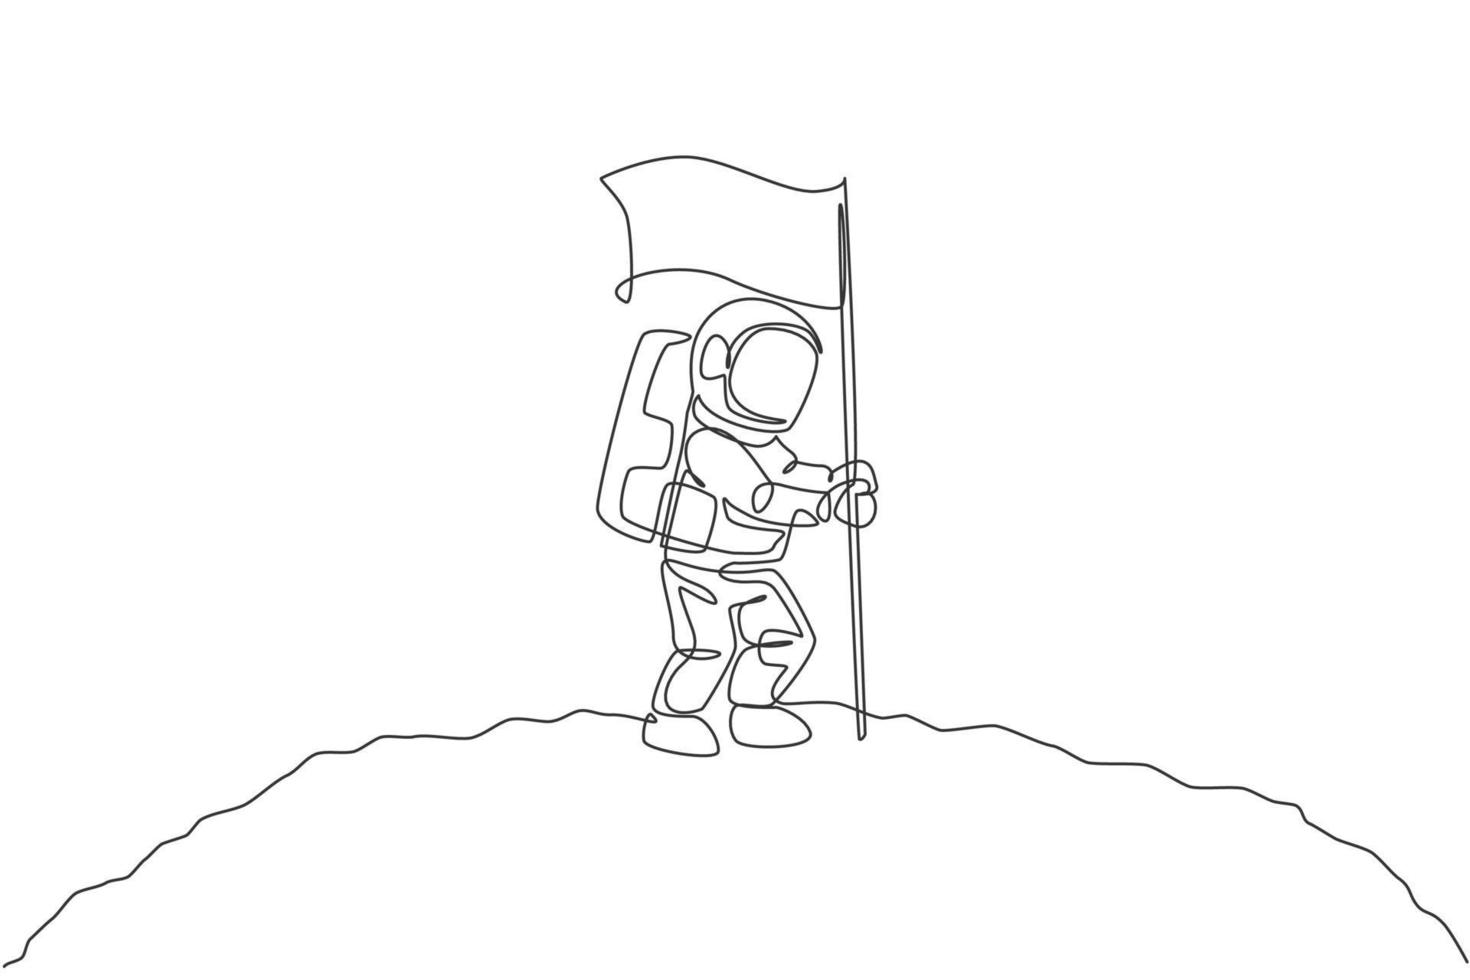 One single line drawing of space man astronaut exploring cosmic galaxy, and planting flag on moon surface vector illustration. Fantasy outer space life fiction concept. Continuous line draw design